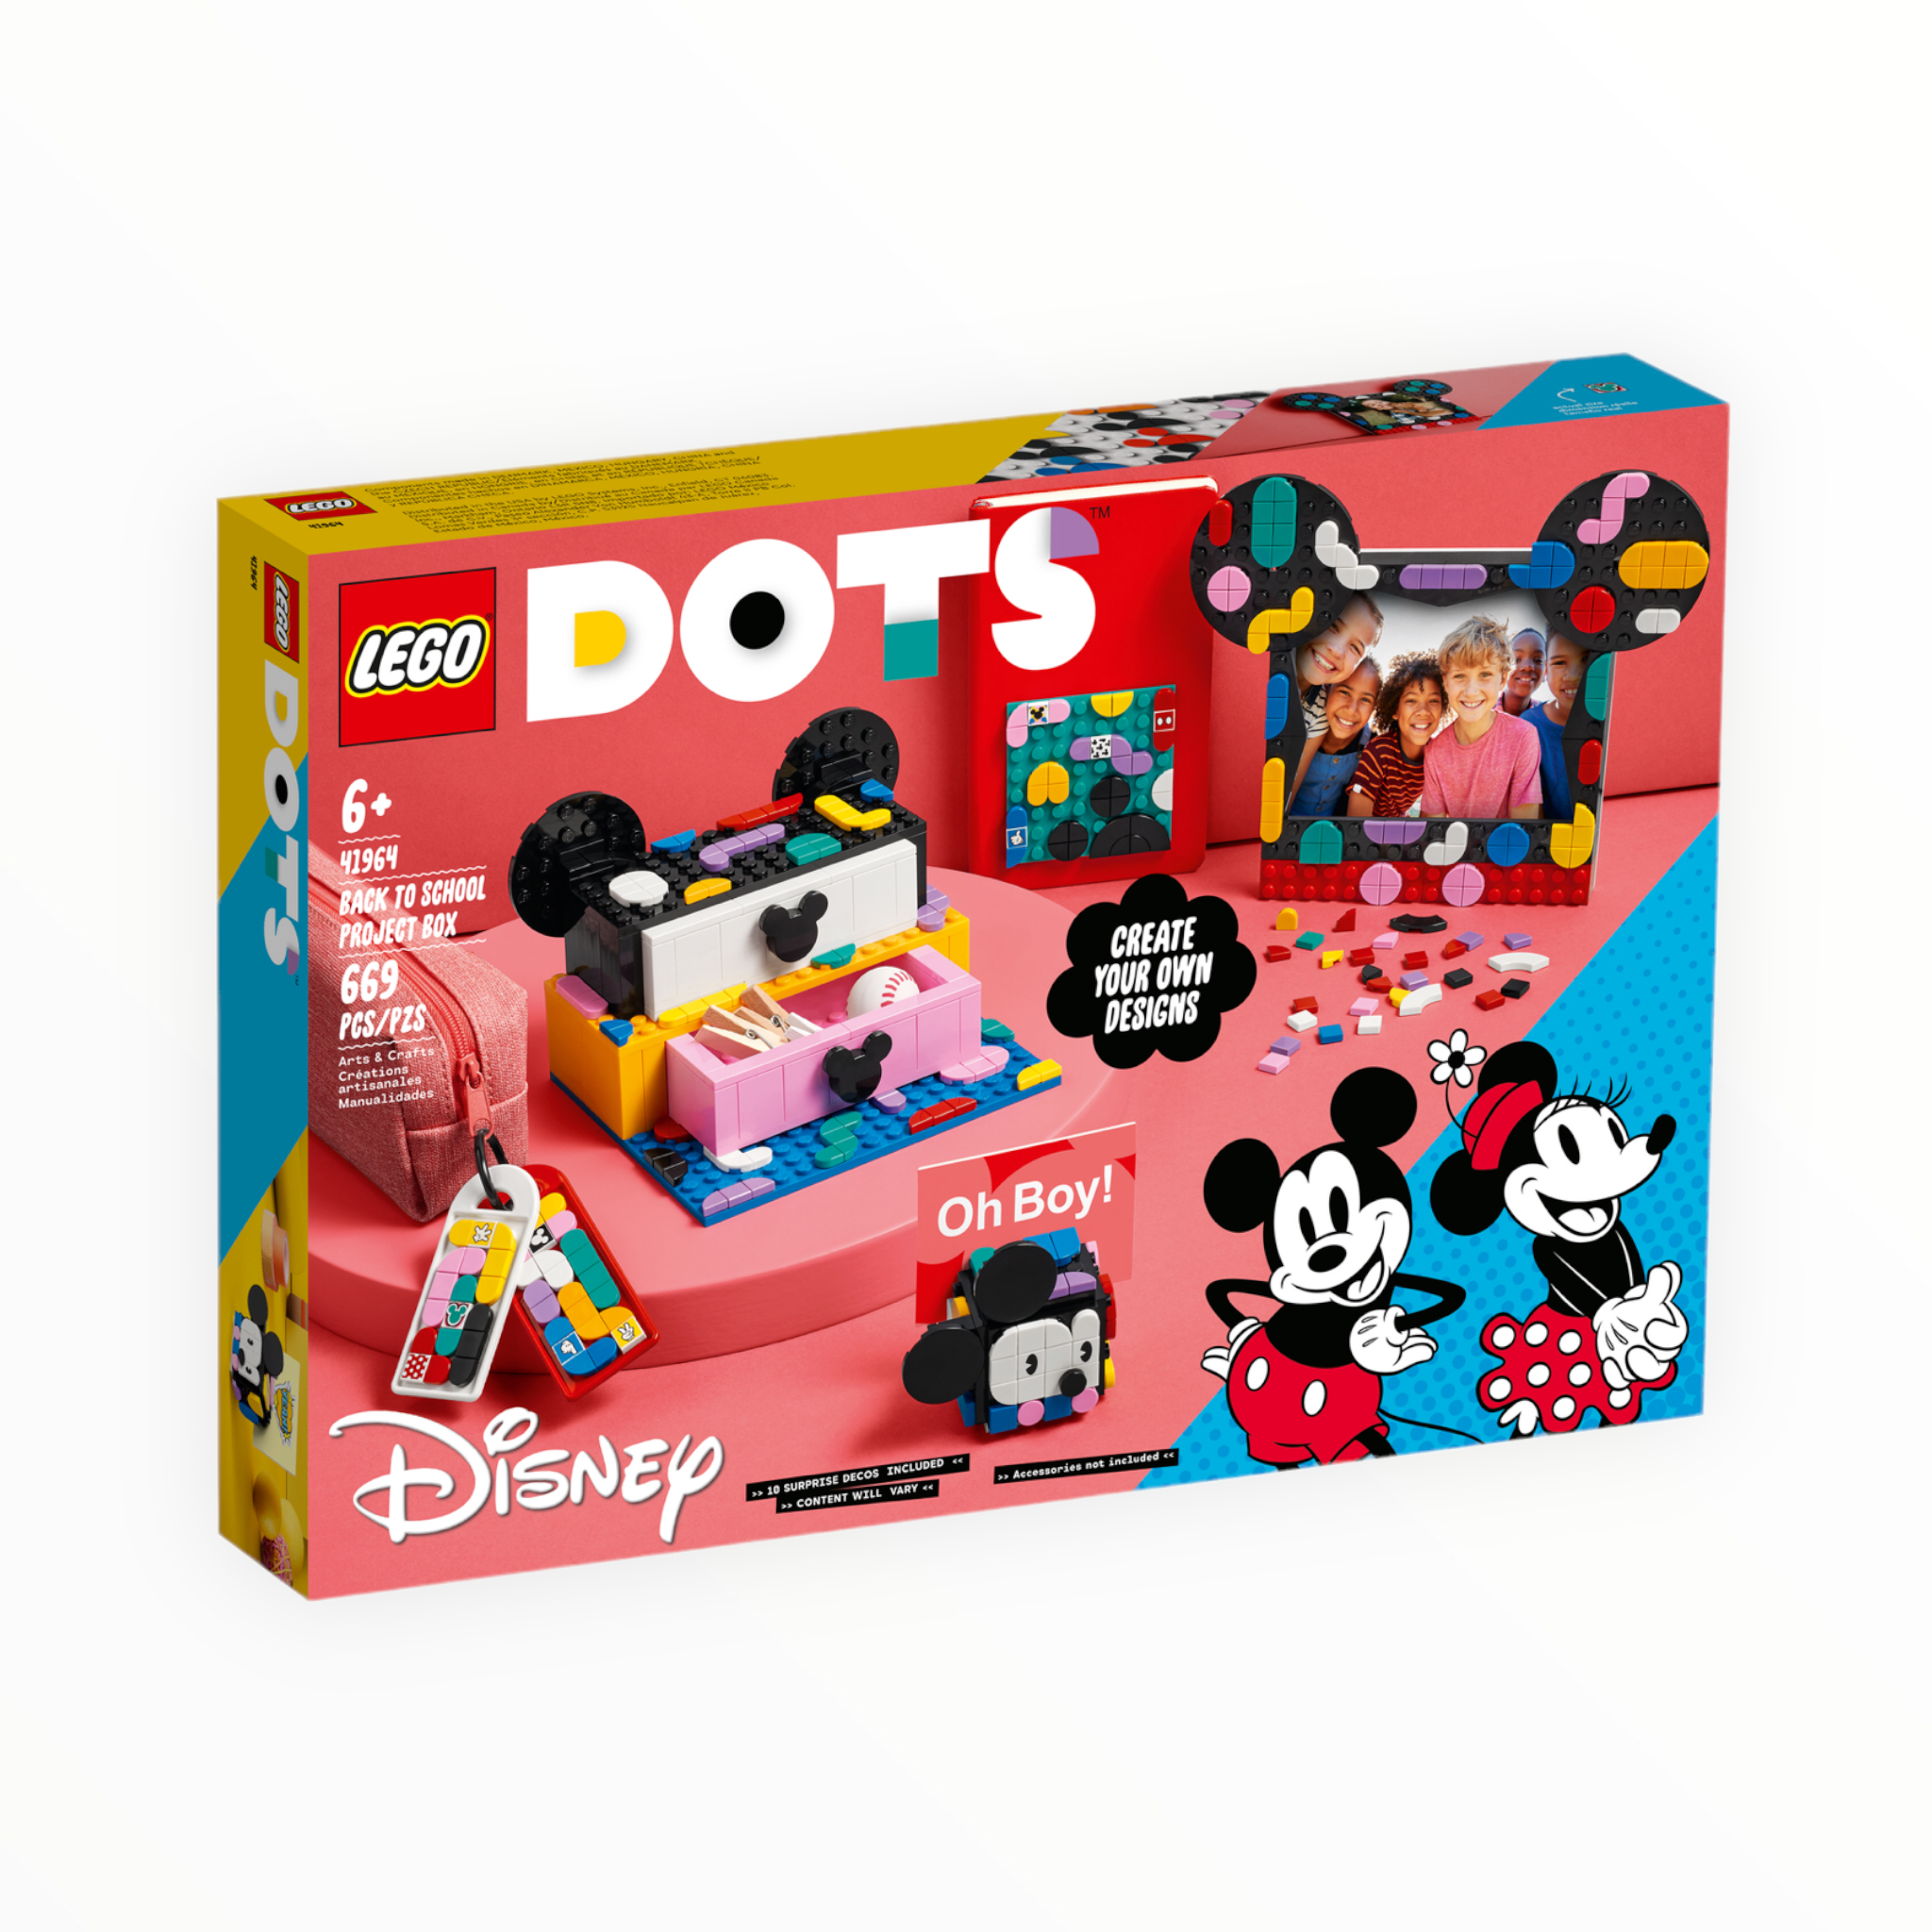 41964 Disney DOTS Mickey & Minnie Mouse Back-to-School Project Box